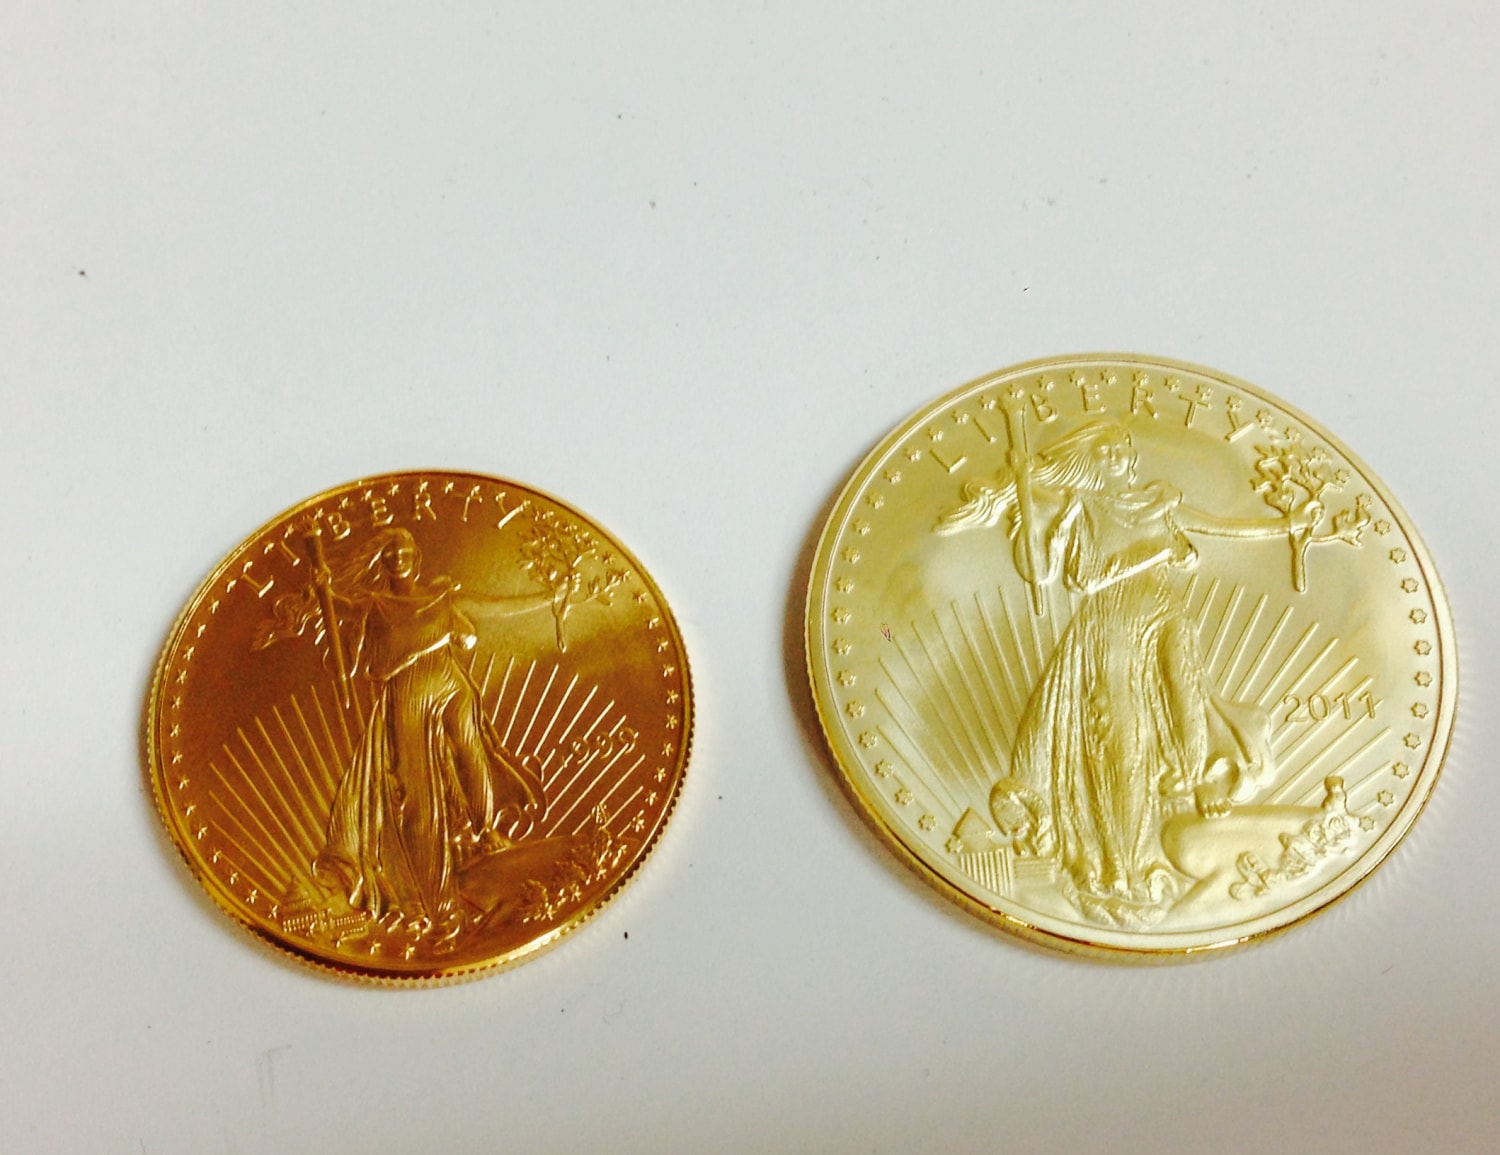 Tiny, but strong, gold plated round magnets will handle tough jobs